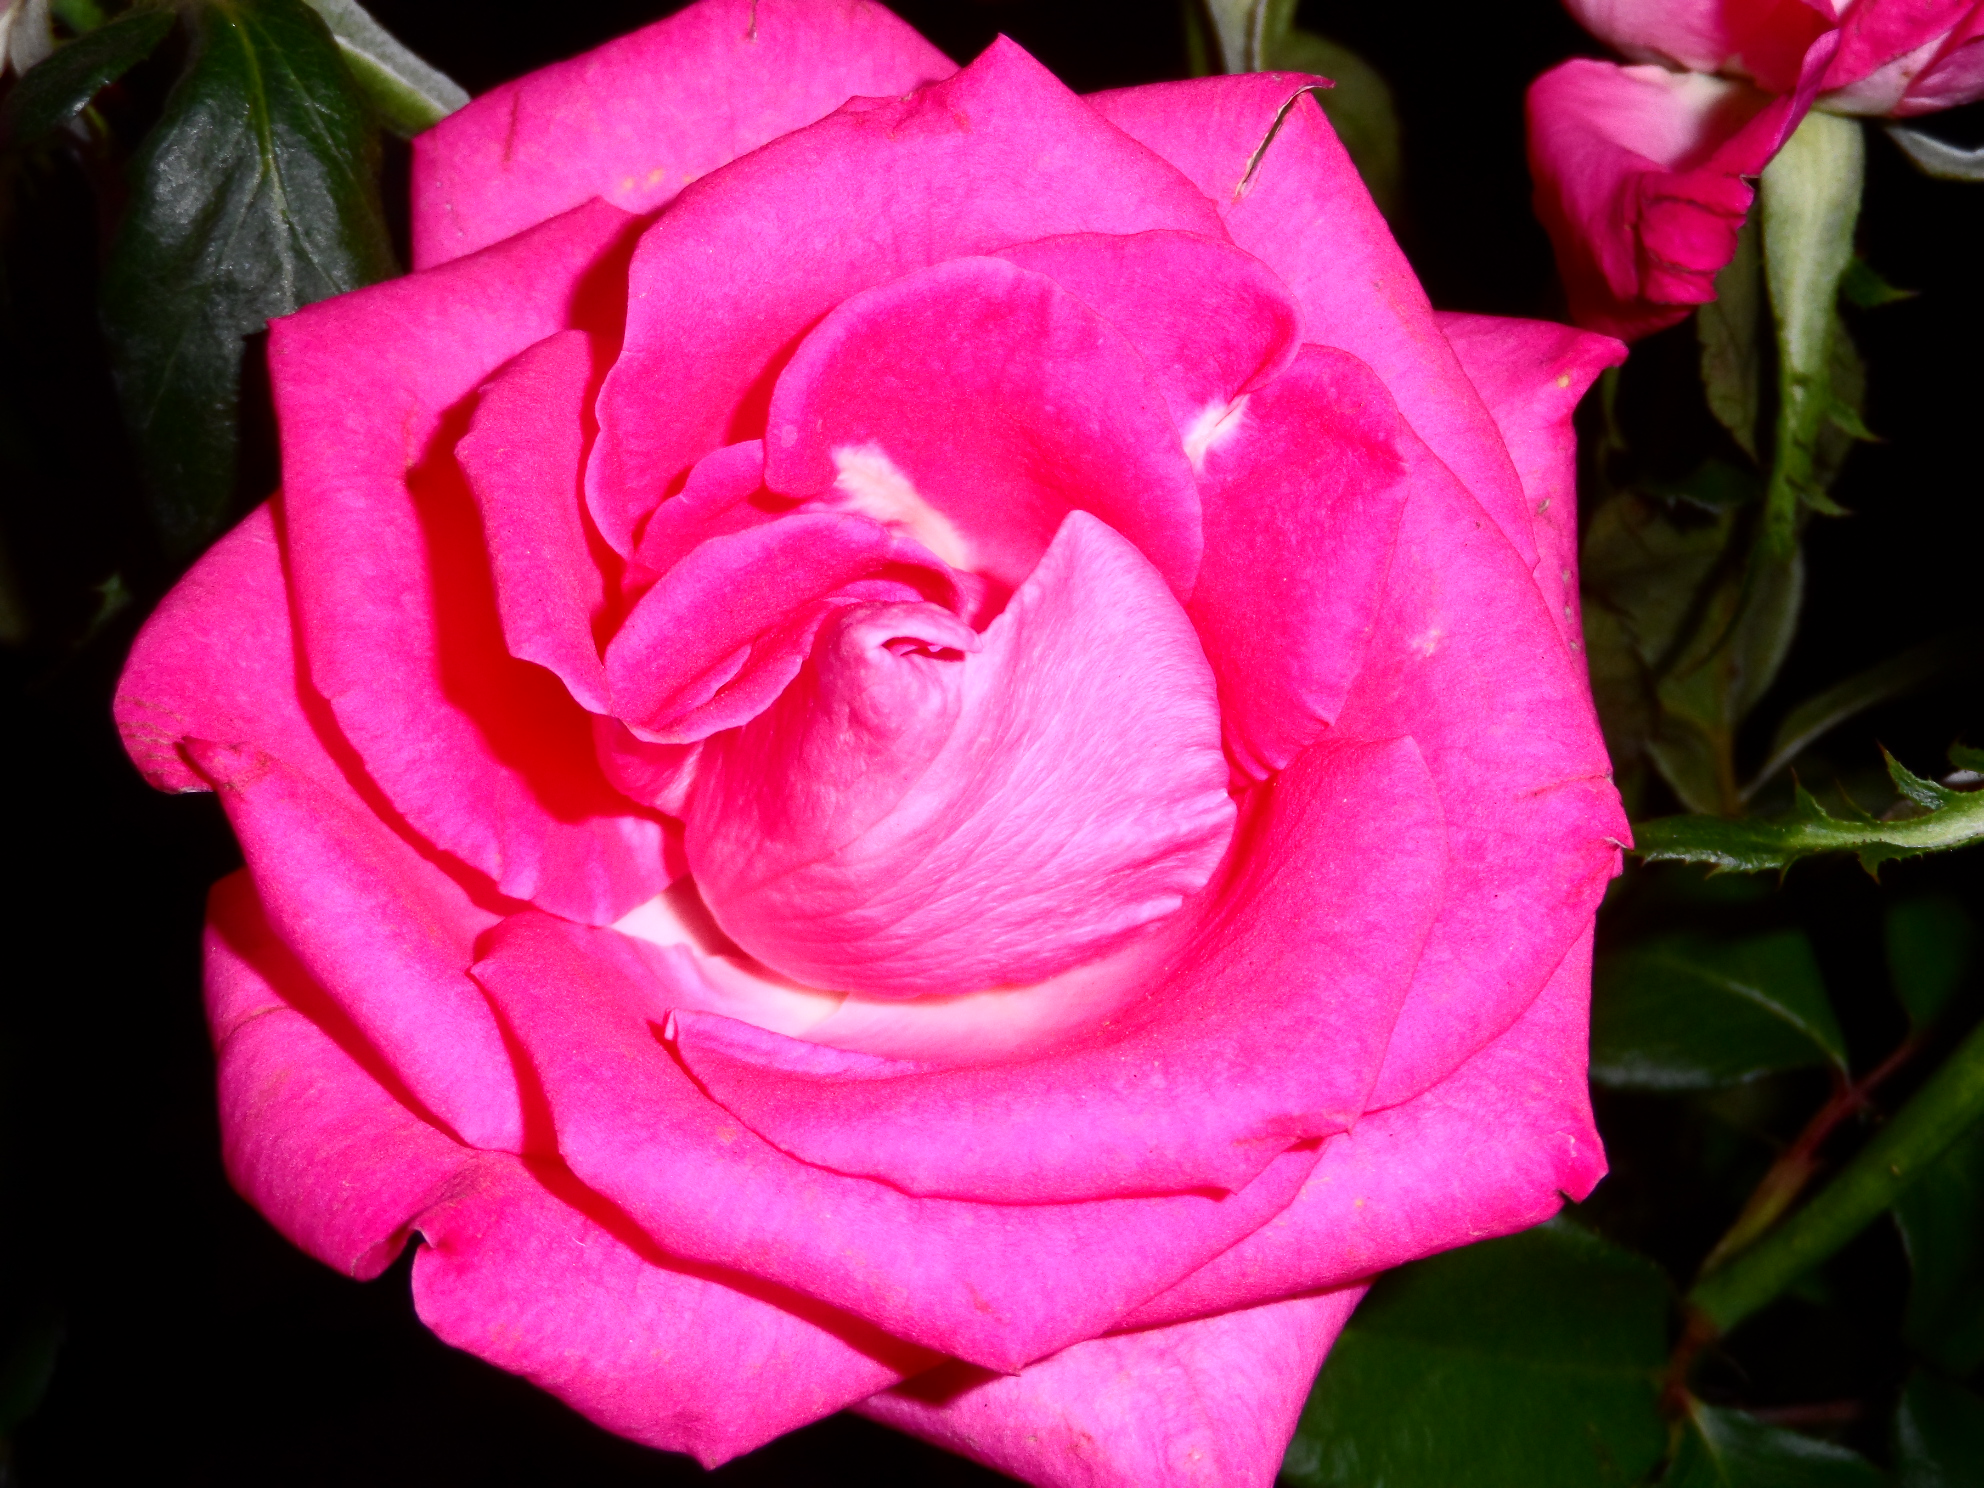 the pink rose has many large petals on it